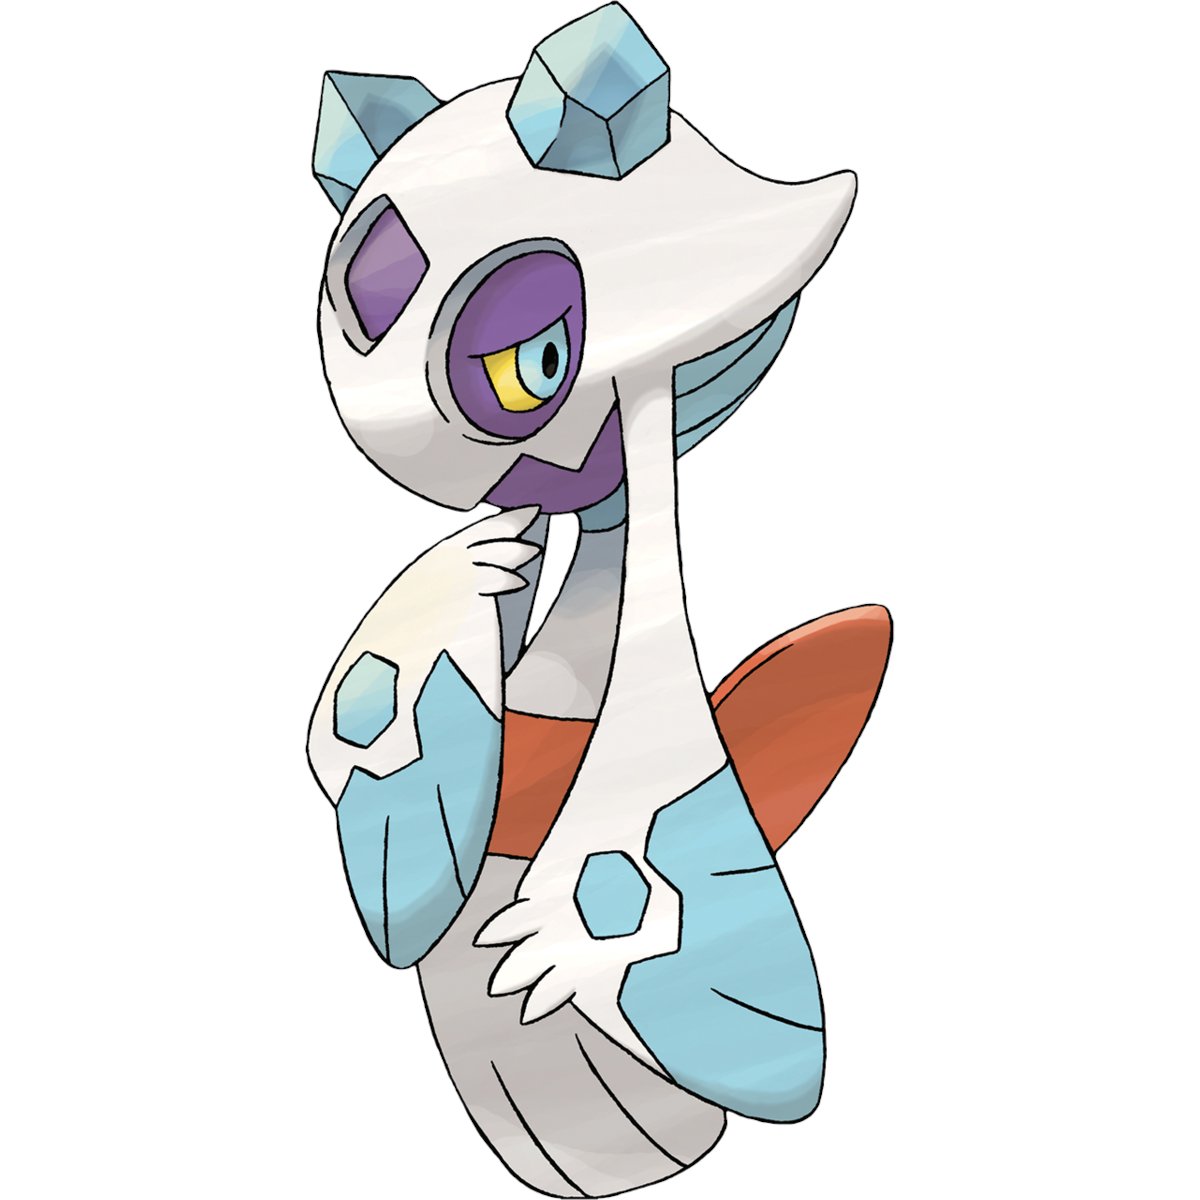 a Frosslass variant based on La Llorona! Froslass is known to freeze men to death in icy mountains, but a Mexican variant could be known to haunt children near rivers. Ghost/Water type for obvious reasons